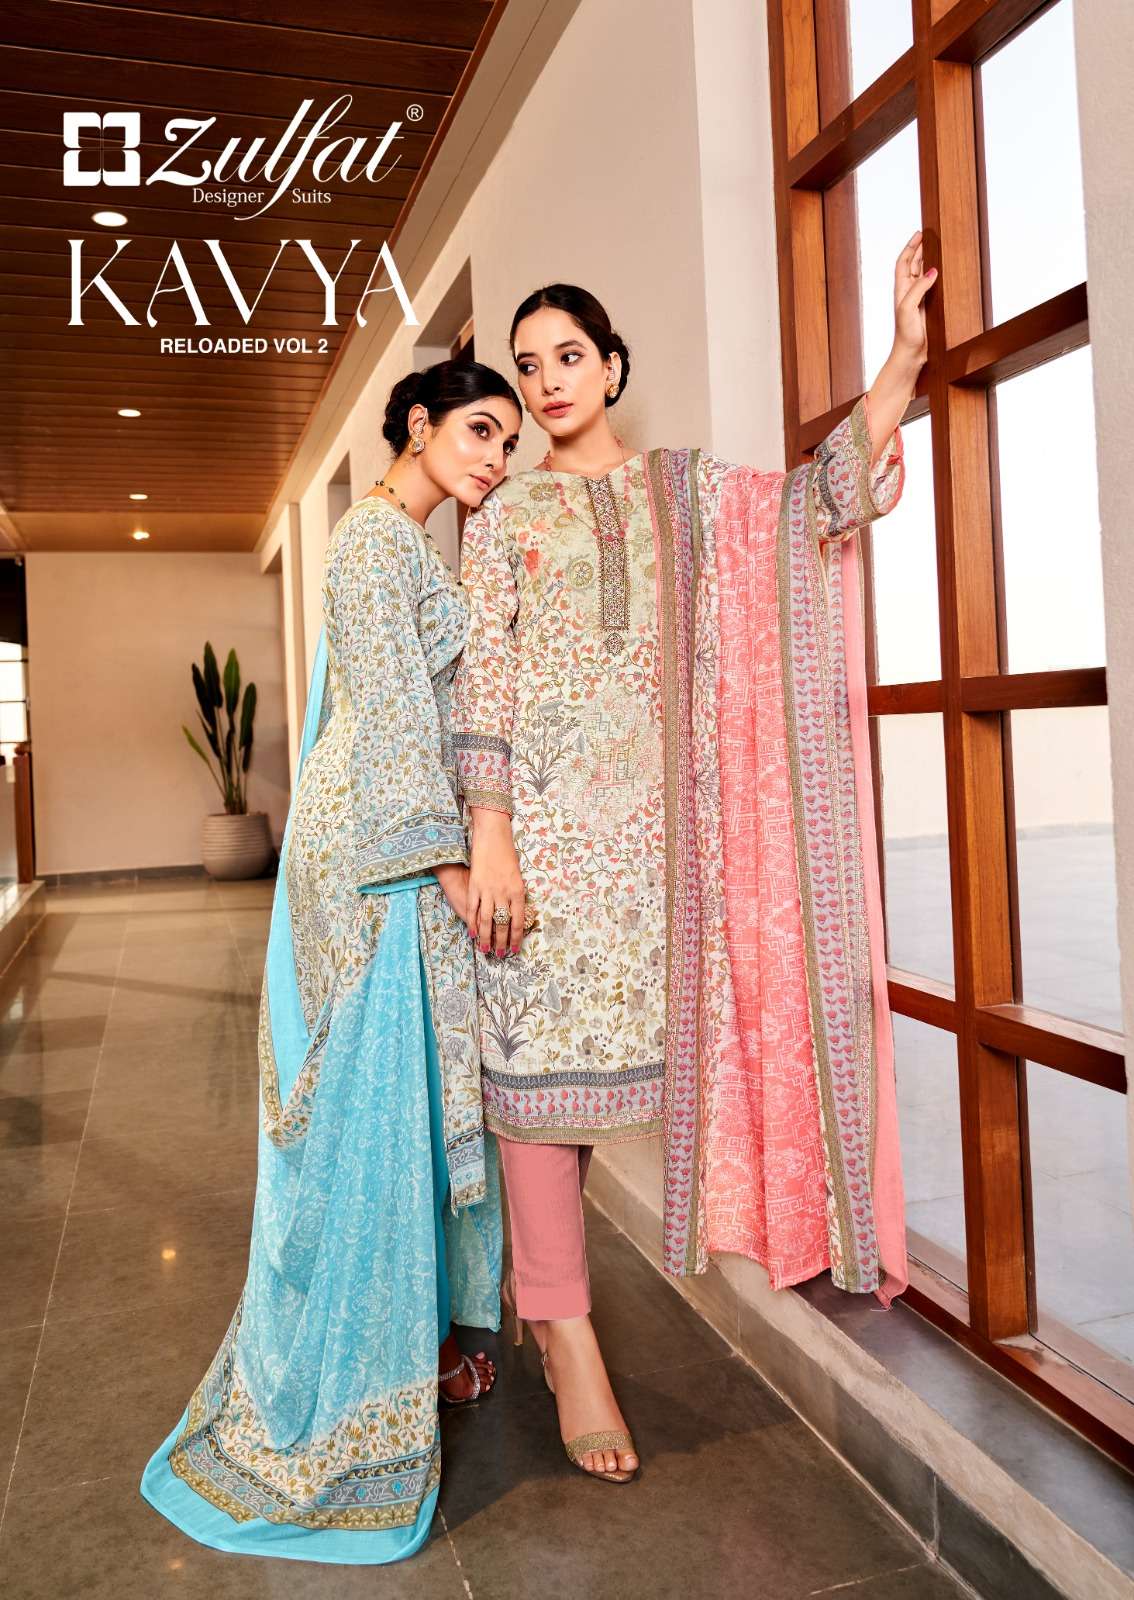 ZULFAT DESIGNER KAVYA VOL 2 DESIGNER COTTON PRINT WITH EMBROIDERY WORK SUITS IN BEST WHOLESALE RATE